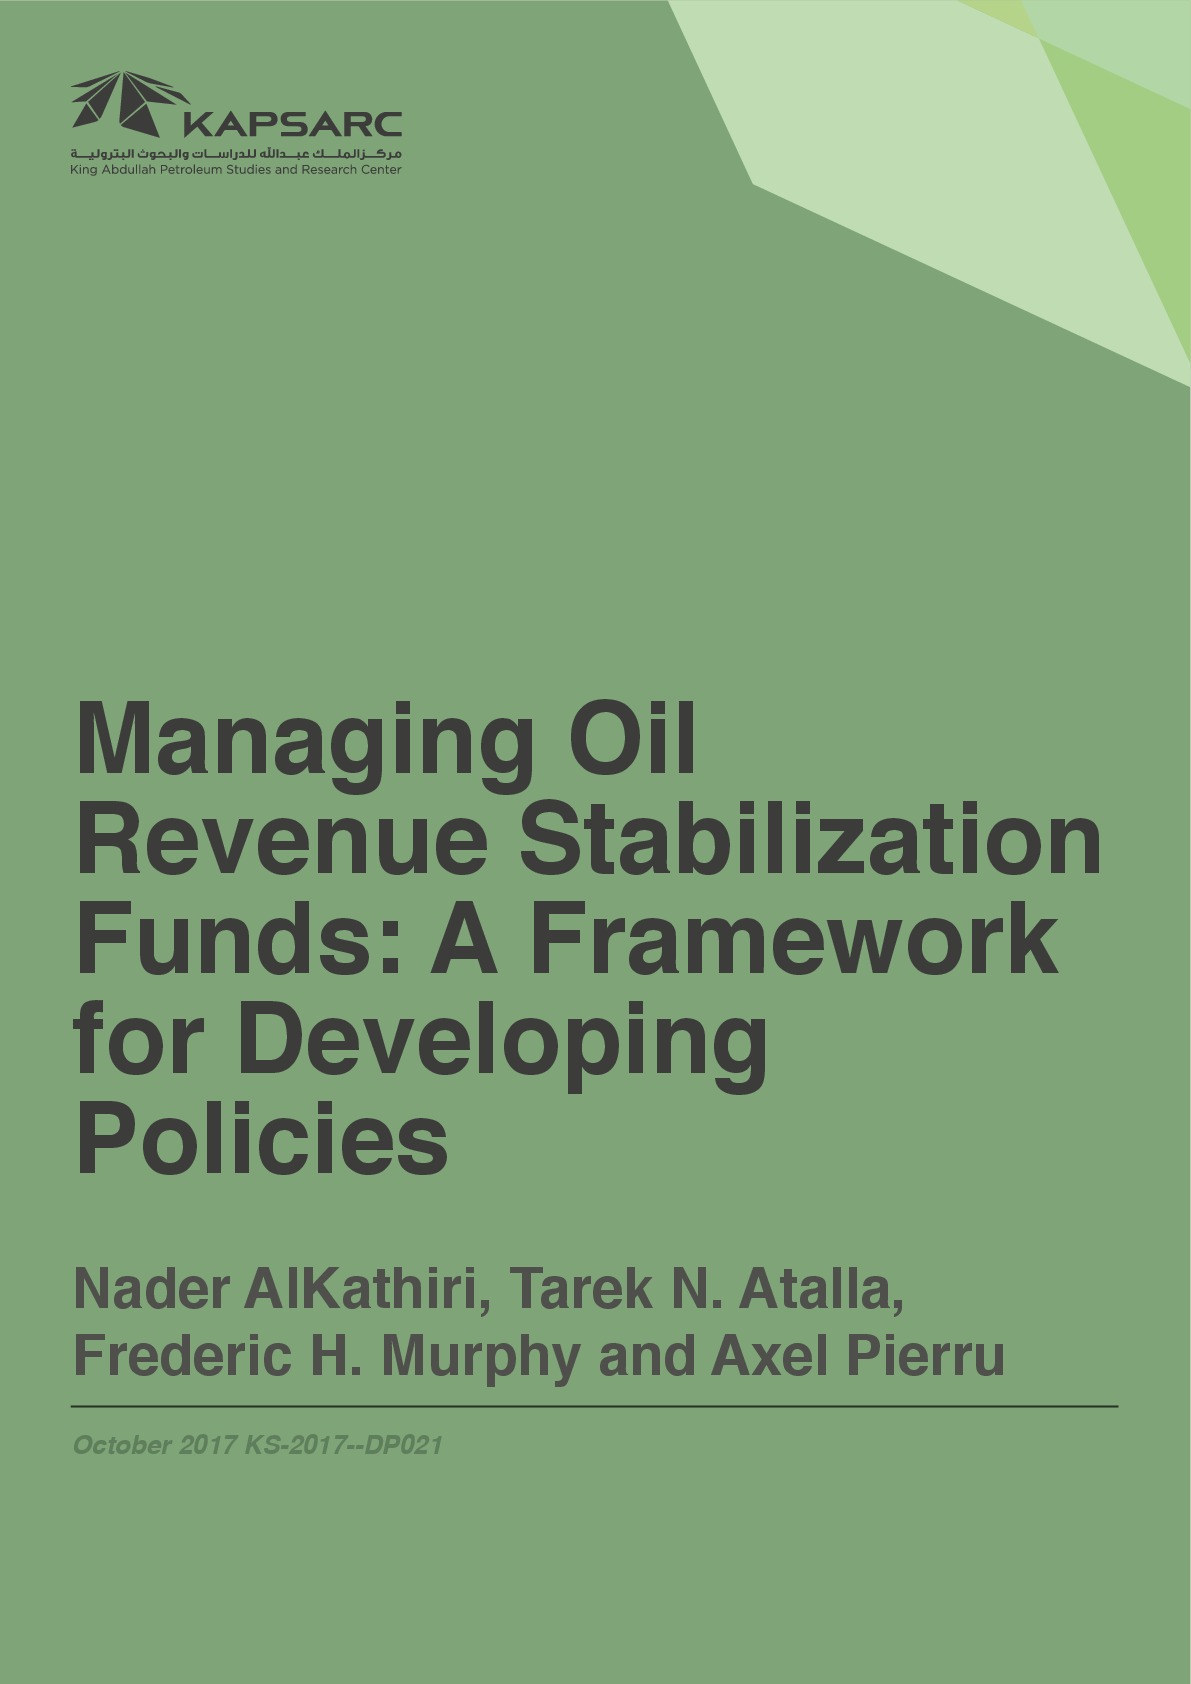 Managing Oil Revenue Stabilization Funds: A Framework for Developing Policies